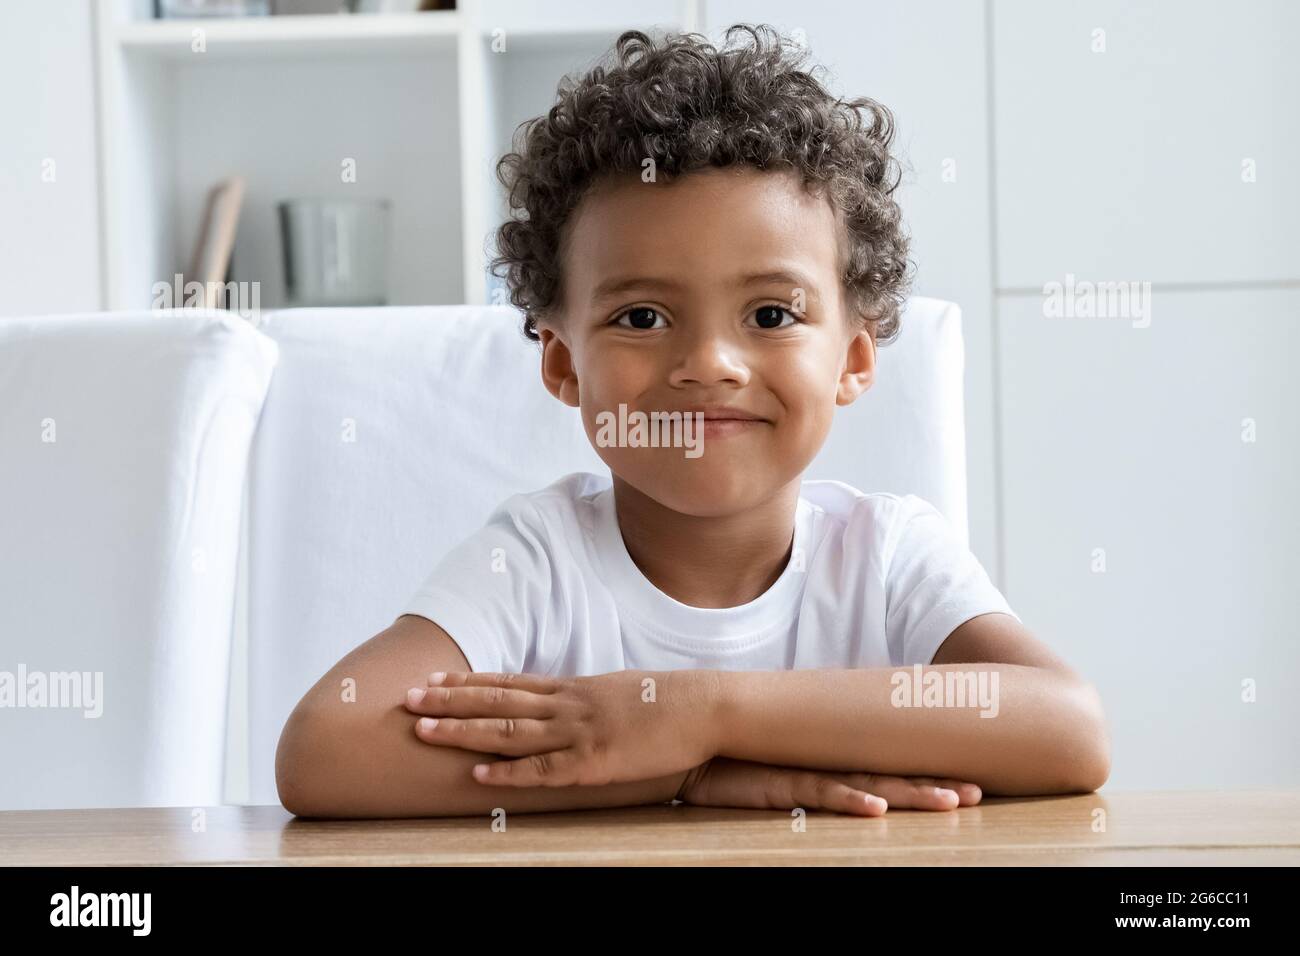 Cute happy smiling preschool boy child student sitting at desk looking at camera Stock Photo